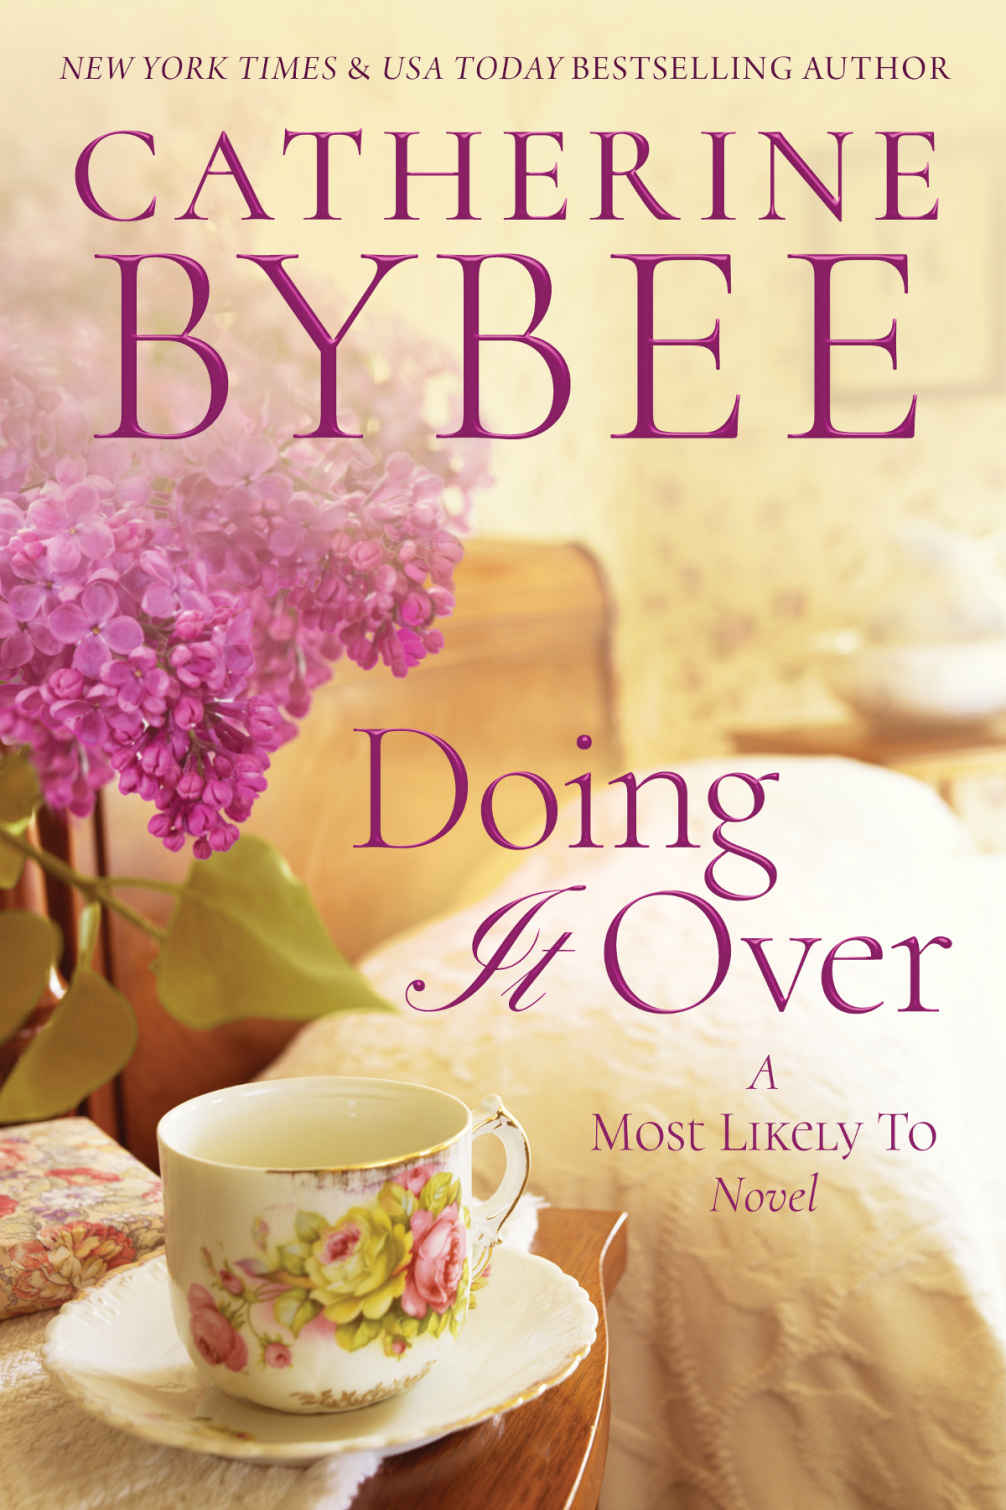 Doing It Over (A Most Likely to Novel Book 1) by Catherine Bybee